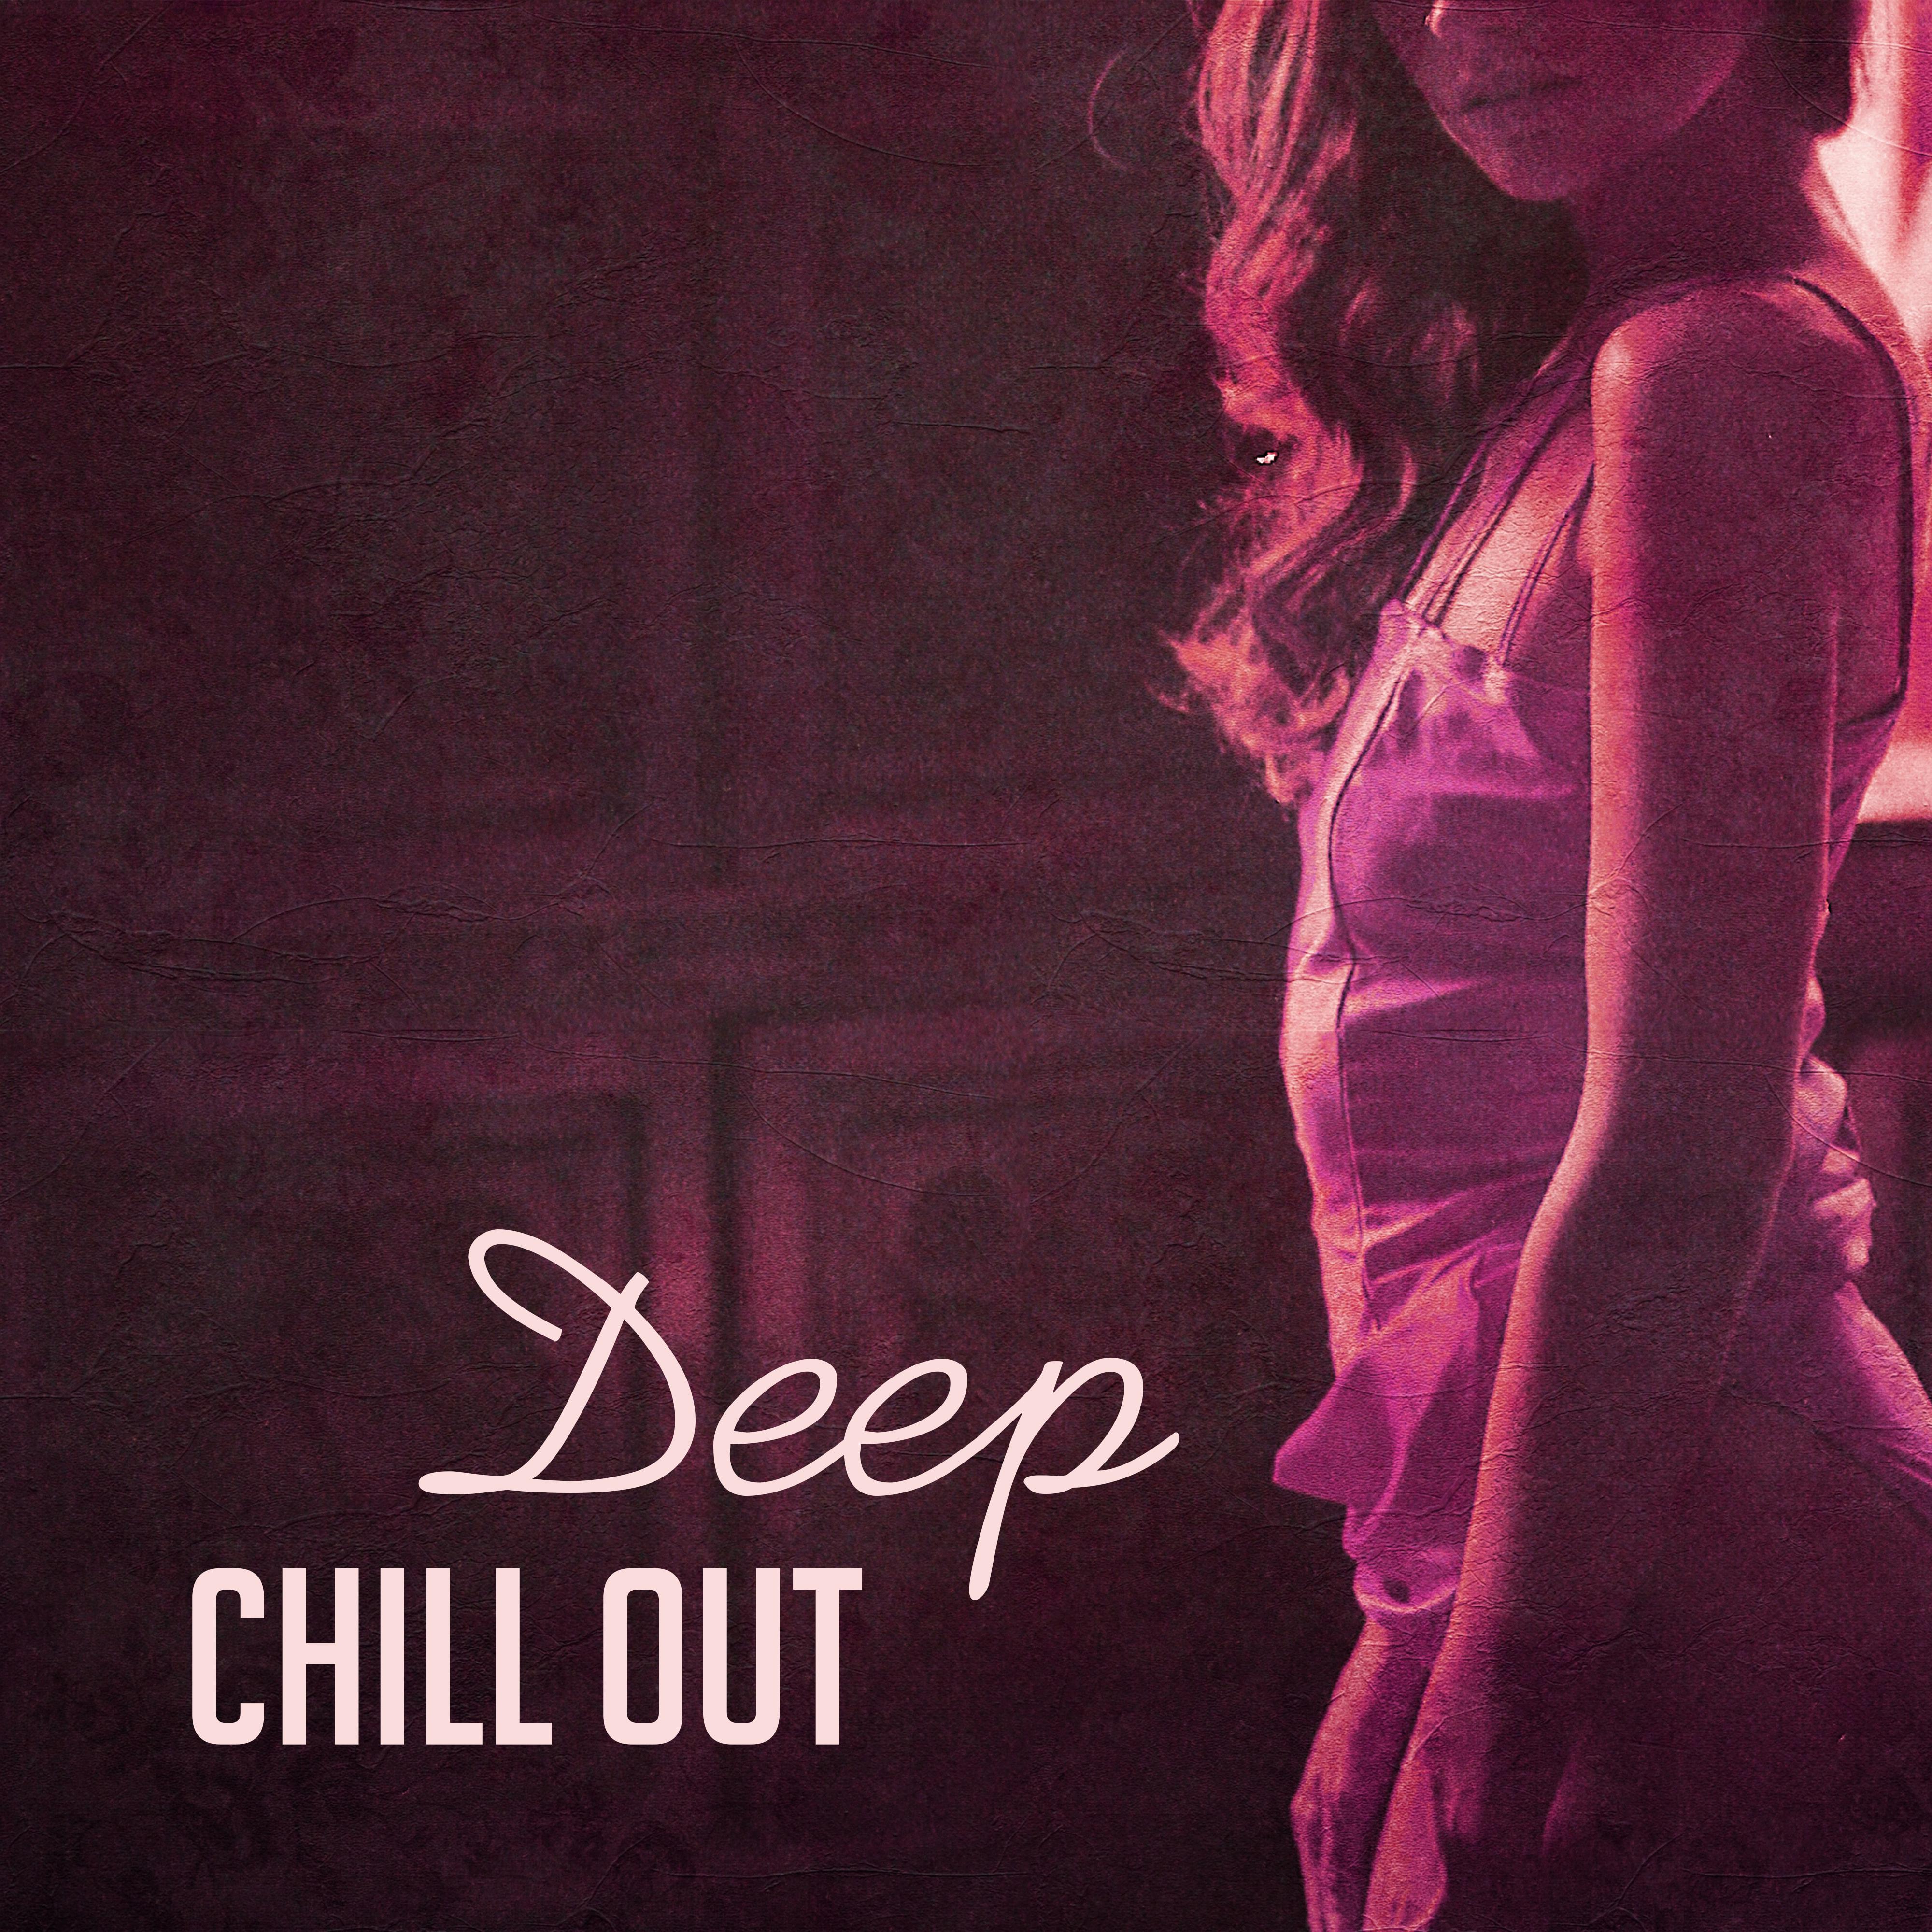 Deep Chill Out – Ibiza Lounge, Positive Vibrations, Beach Chill, Summertime, Pure Relaxation, Electronic Music, **** Chill